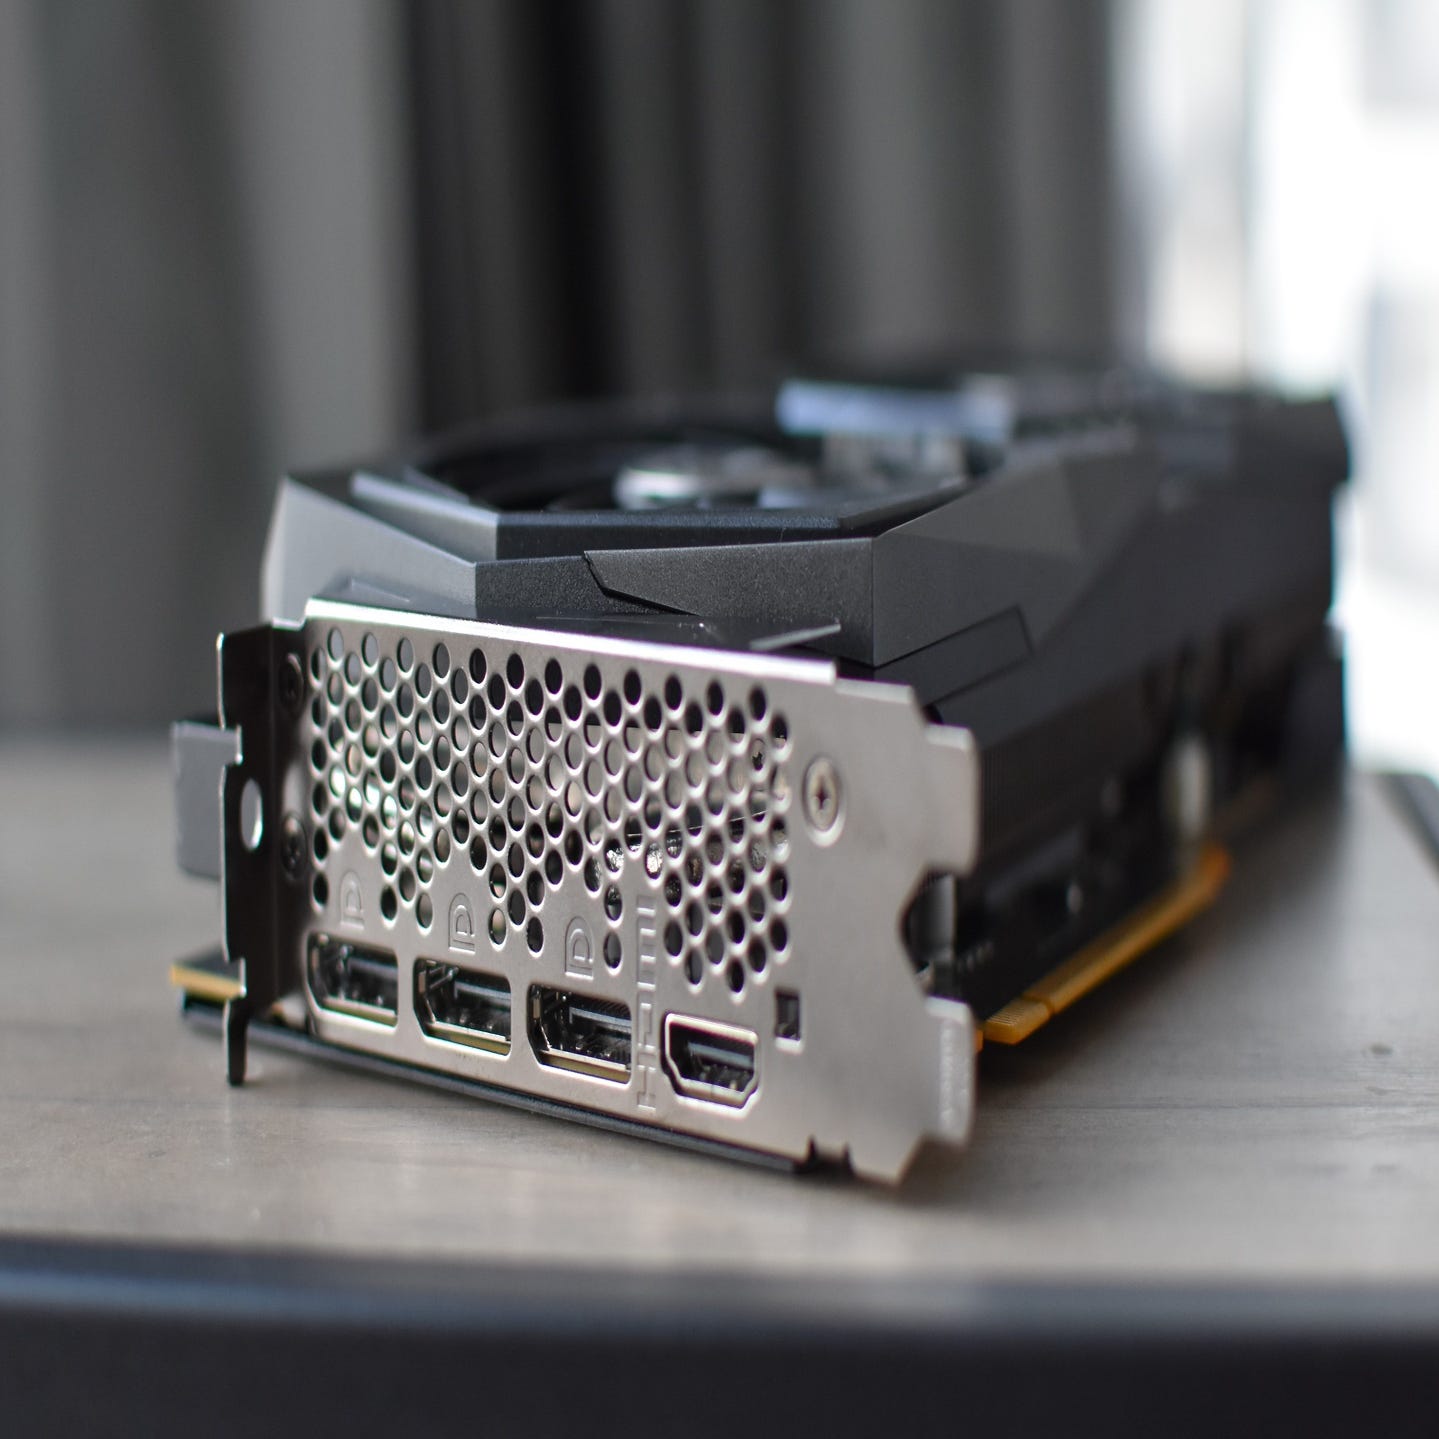 Nvidia RTX 3050 review: For an overpriced 1080p GPU, this could've